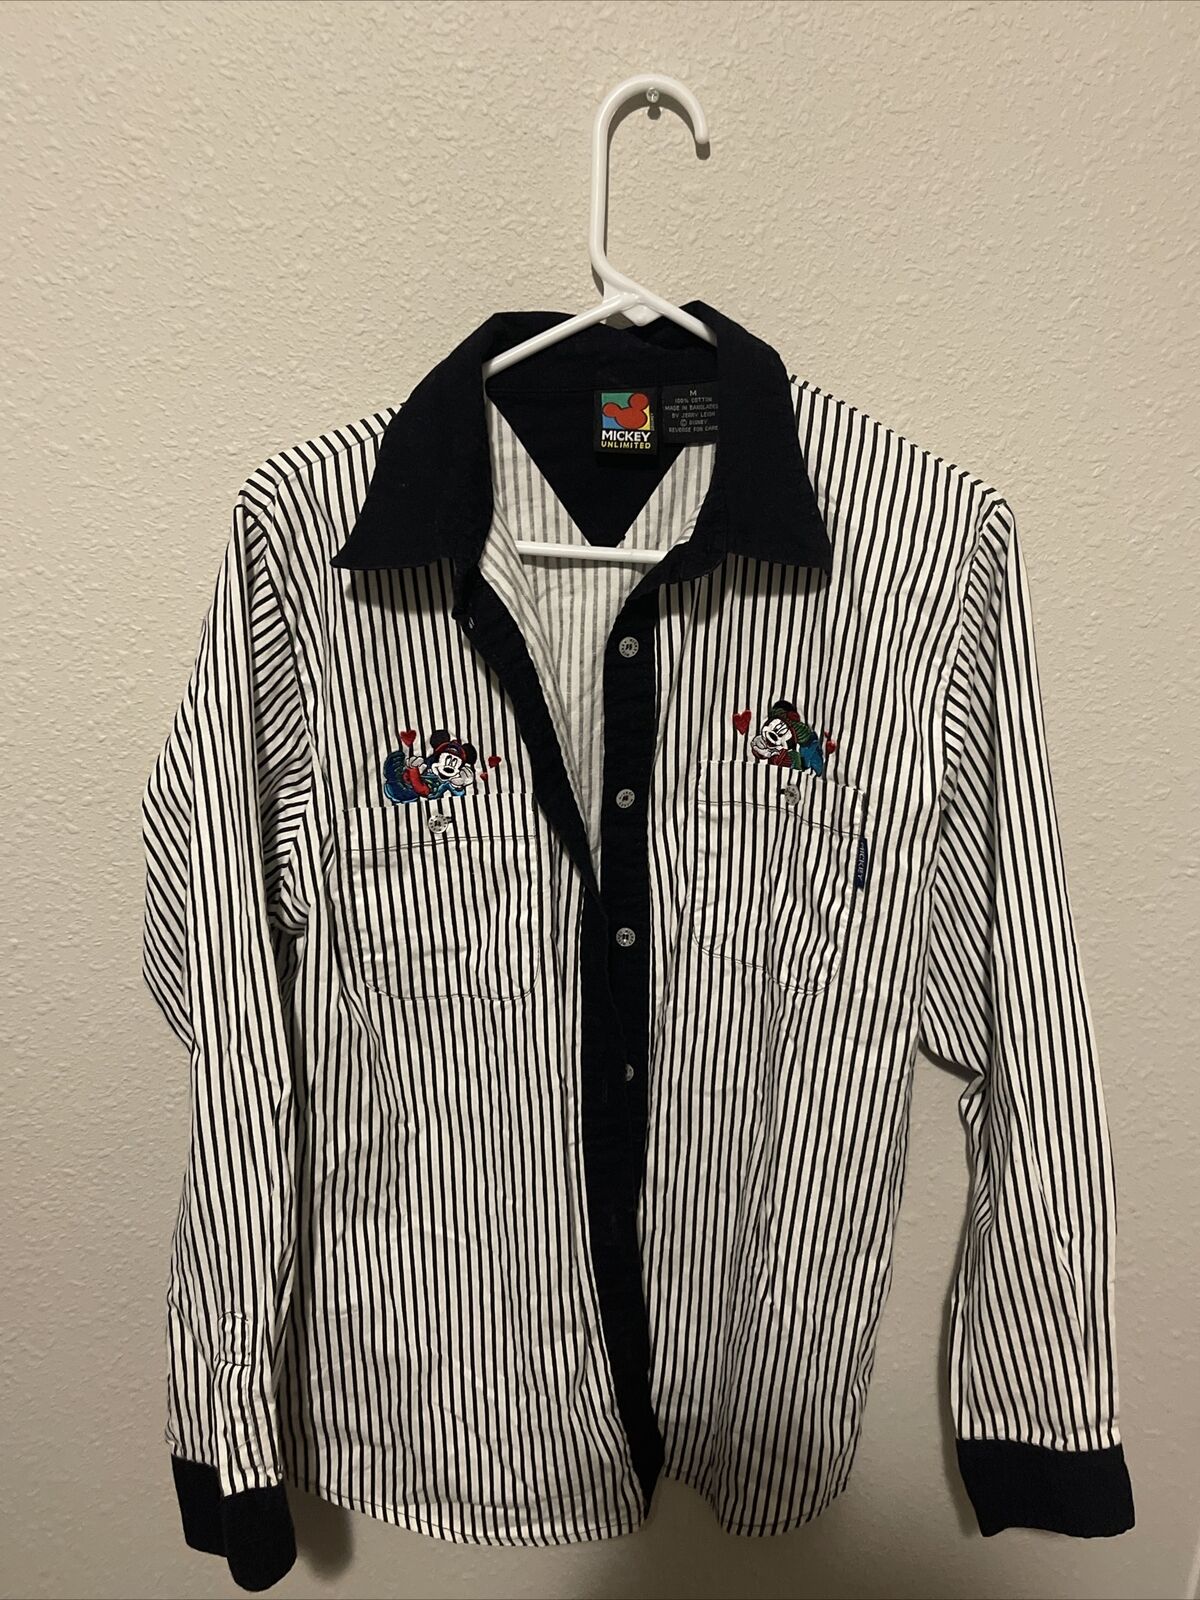 Vintage Mickey Unlimited Size Medium Striped Embroidered Shirt Mickey Minnie